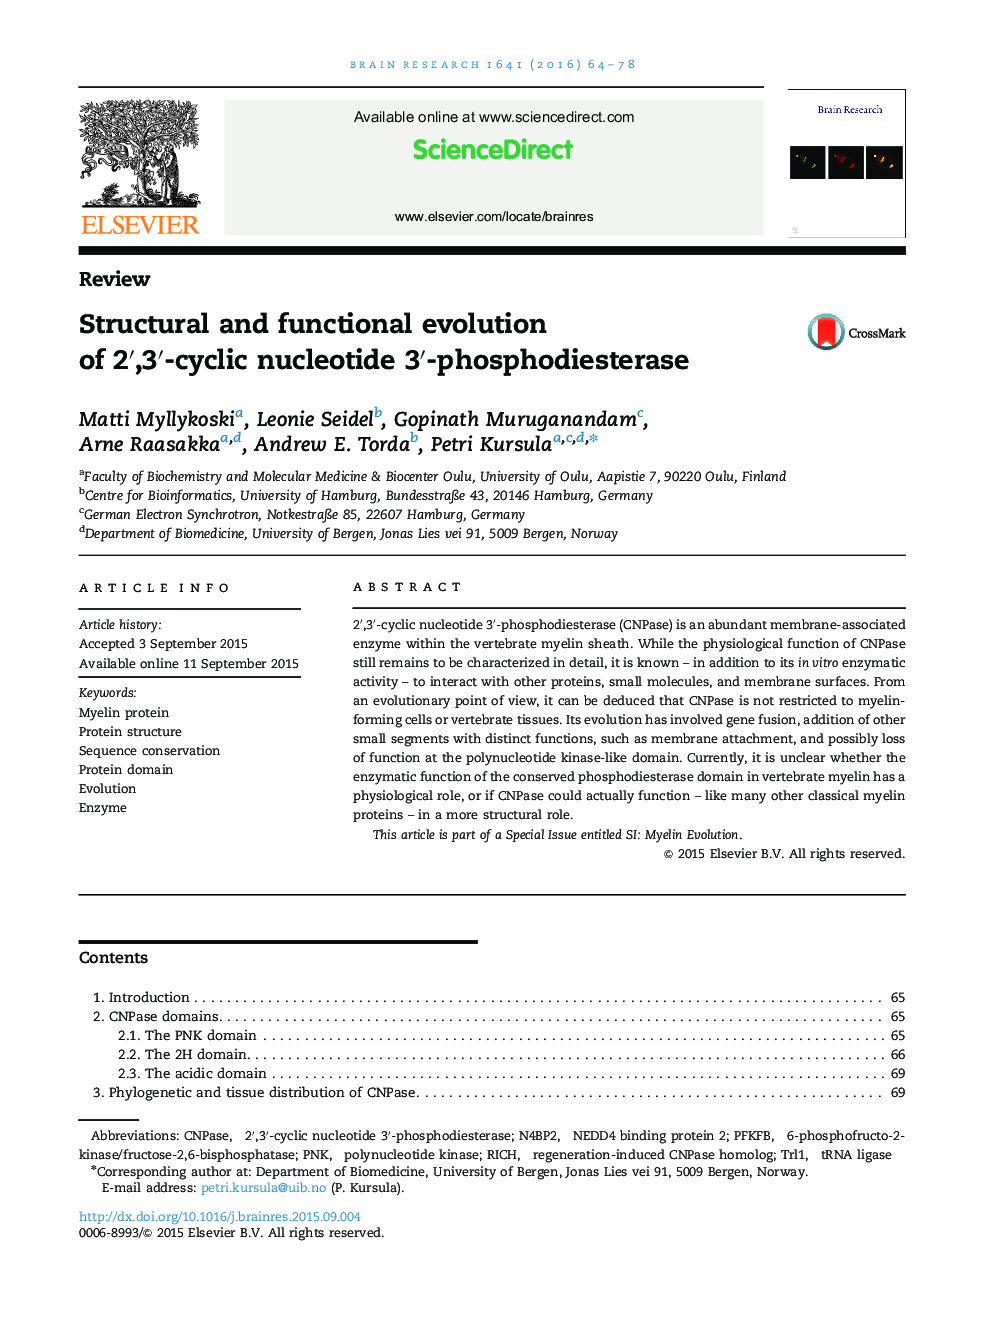 ReviewStructural and functional evolution of 2â²,3â²-cyclic nucleotide 3â²-phosphodiesterase